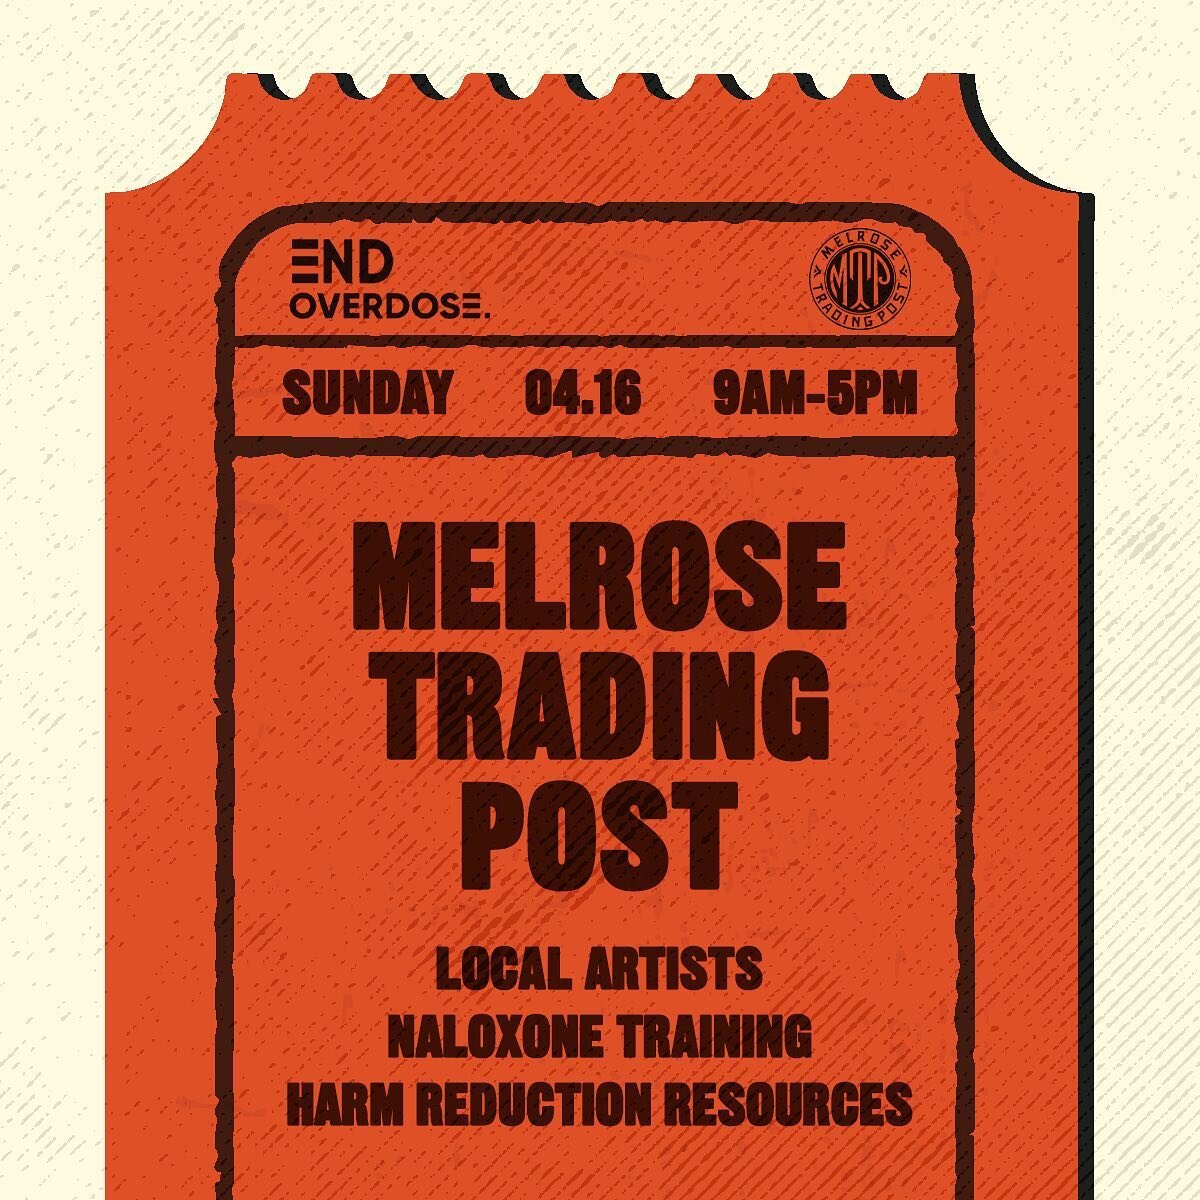 LA&mdash; we&rsquo;ll be at Melrose Trading Post alongside the amazing work of local artists @a_mandala_art, @arielcohen_art &amp; @ericmichael_art + harm reduction resources to support &amp; raise money for @end.overdose. see you today 🖤